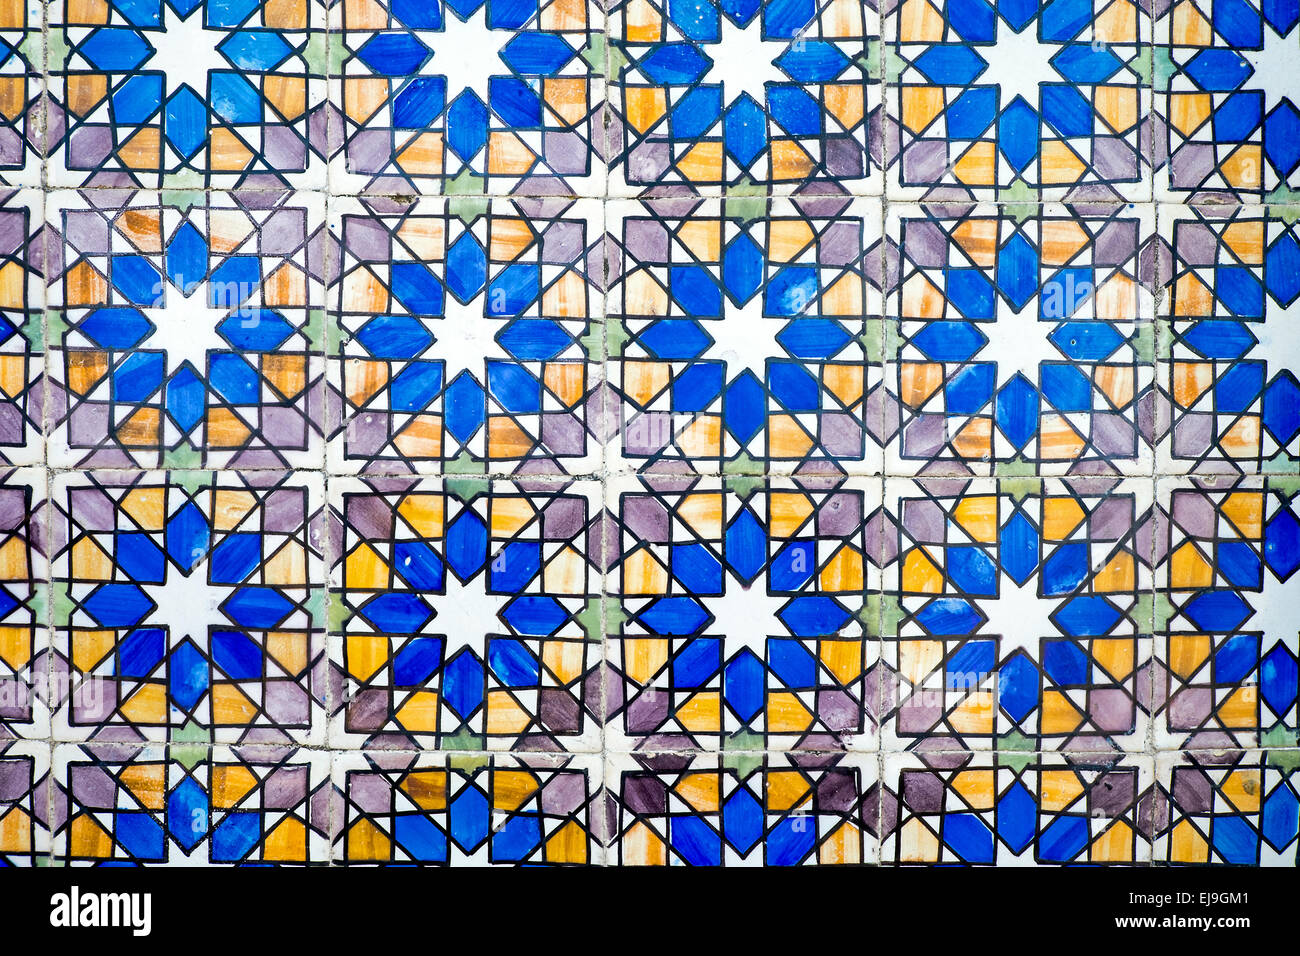 Typical old tiles from Portugal Stock Photo